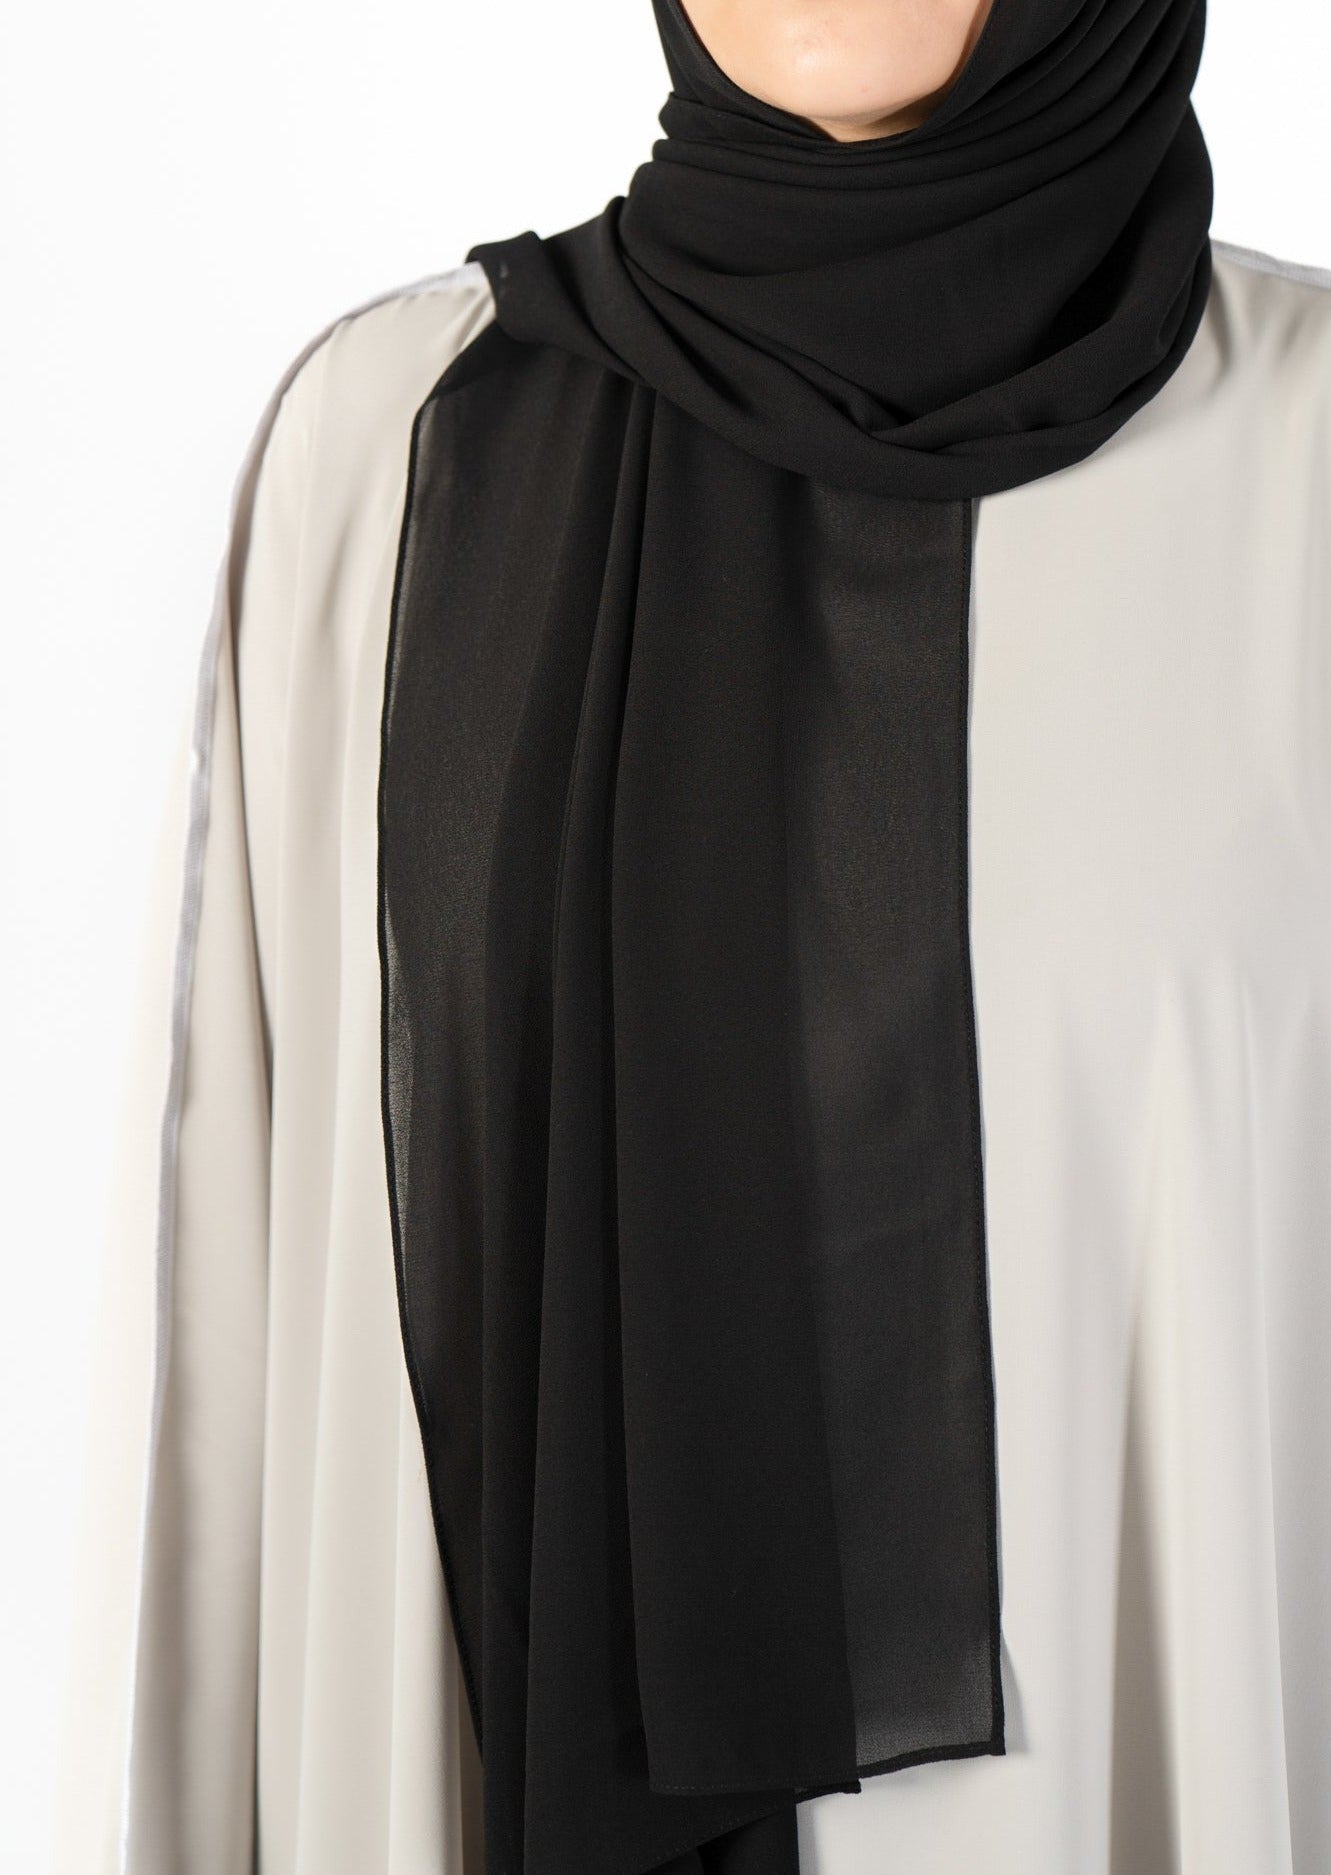 Introducing the 'Tie Back Instant Hijab' which features our Premium Chiffon shawl stitched to our Cotton Lycra Inner cap. The tie-back feature allows adjustment of tightness to ensure versatility and upmost comfort. A perfect blend of two staple tone grays suitable for almost any outfit. Its easy-to-wear nature makes it essential in every wardrobe.